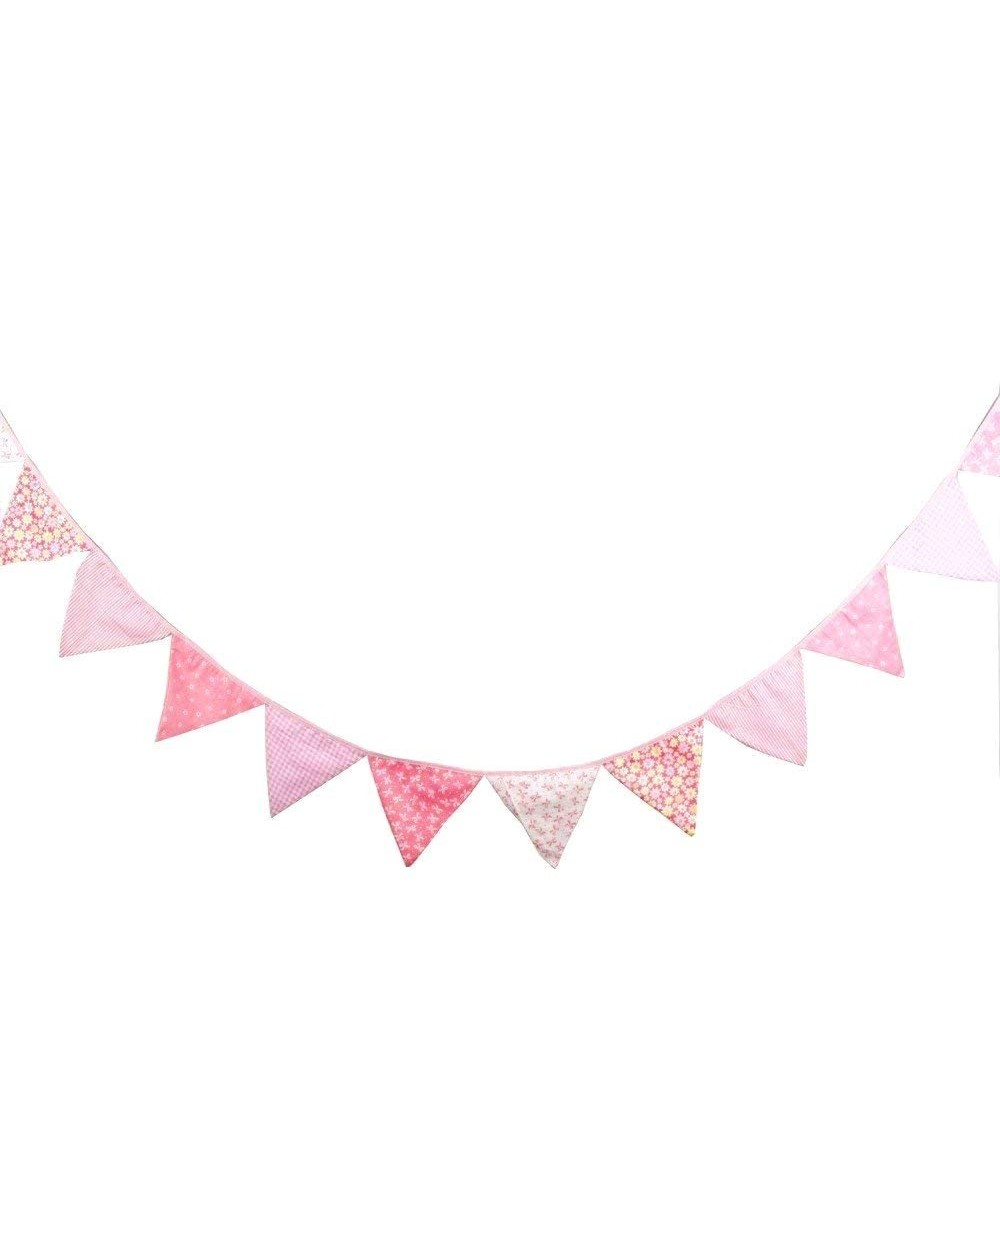 Banners & Garlands 3.5m 11.5ft Pink Party Bunting Triangle Flag Cloth Banner String Pennant Flags for Girl Birthday Baptism C...